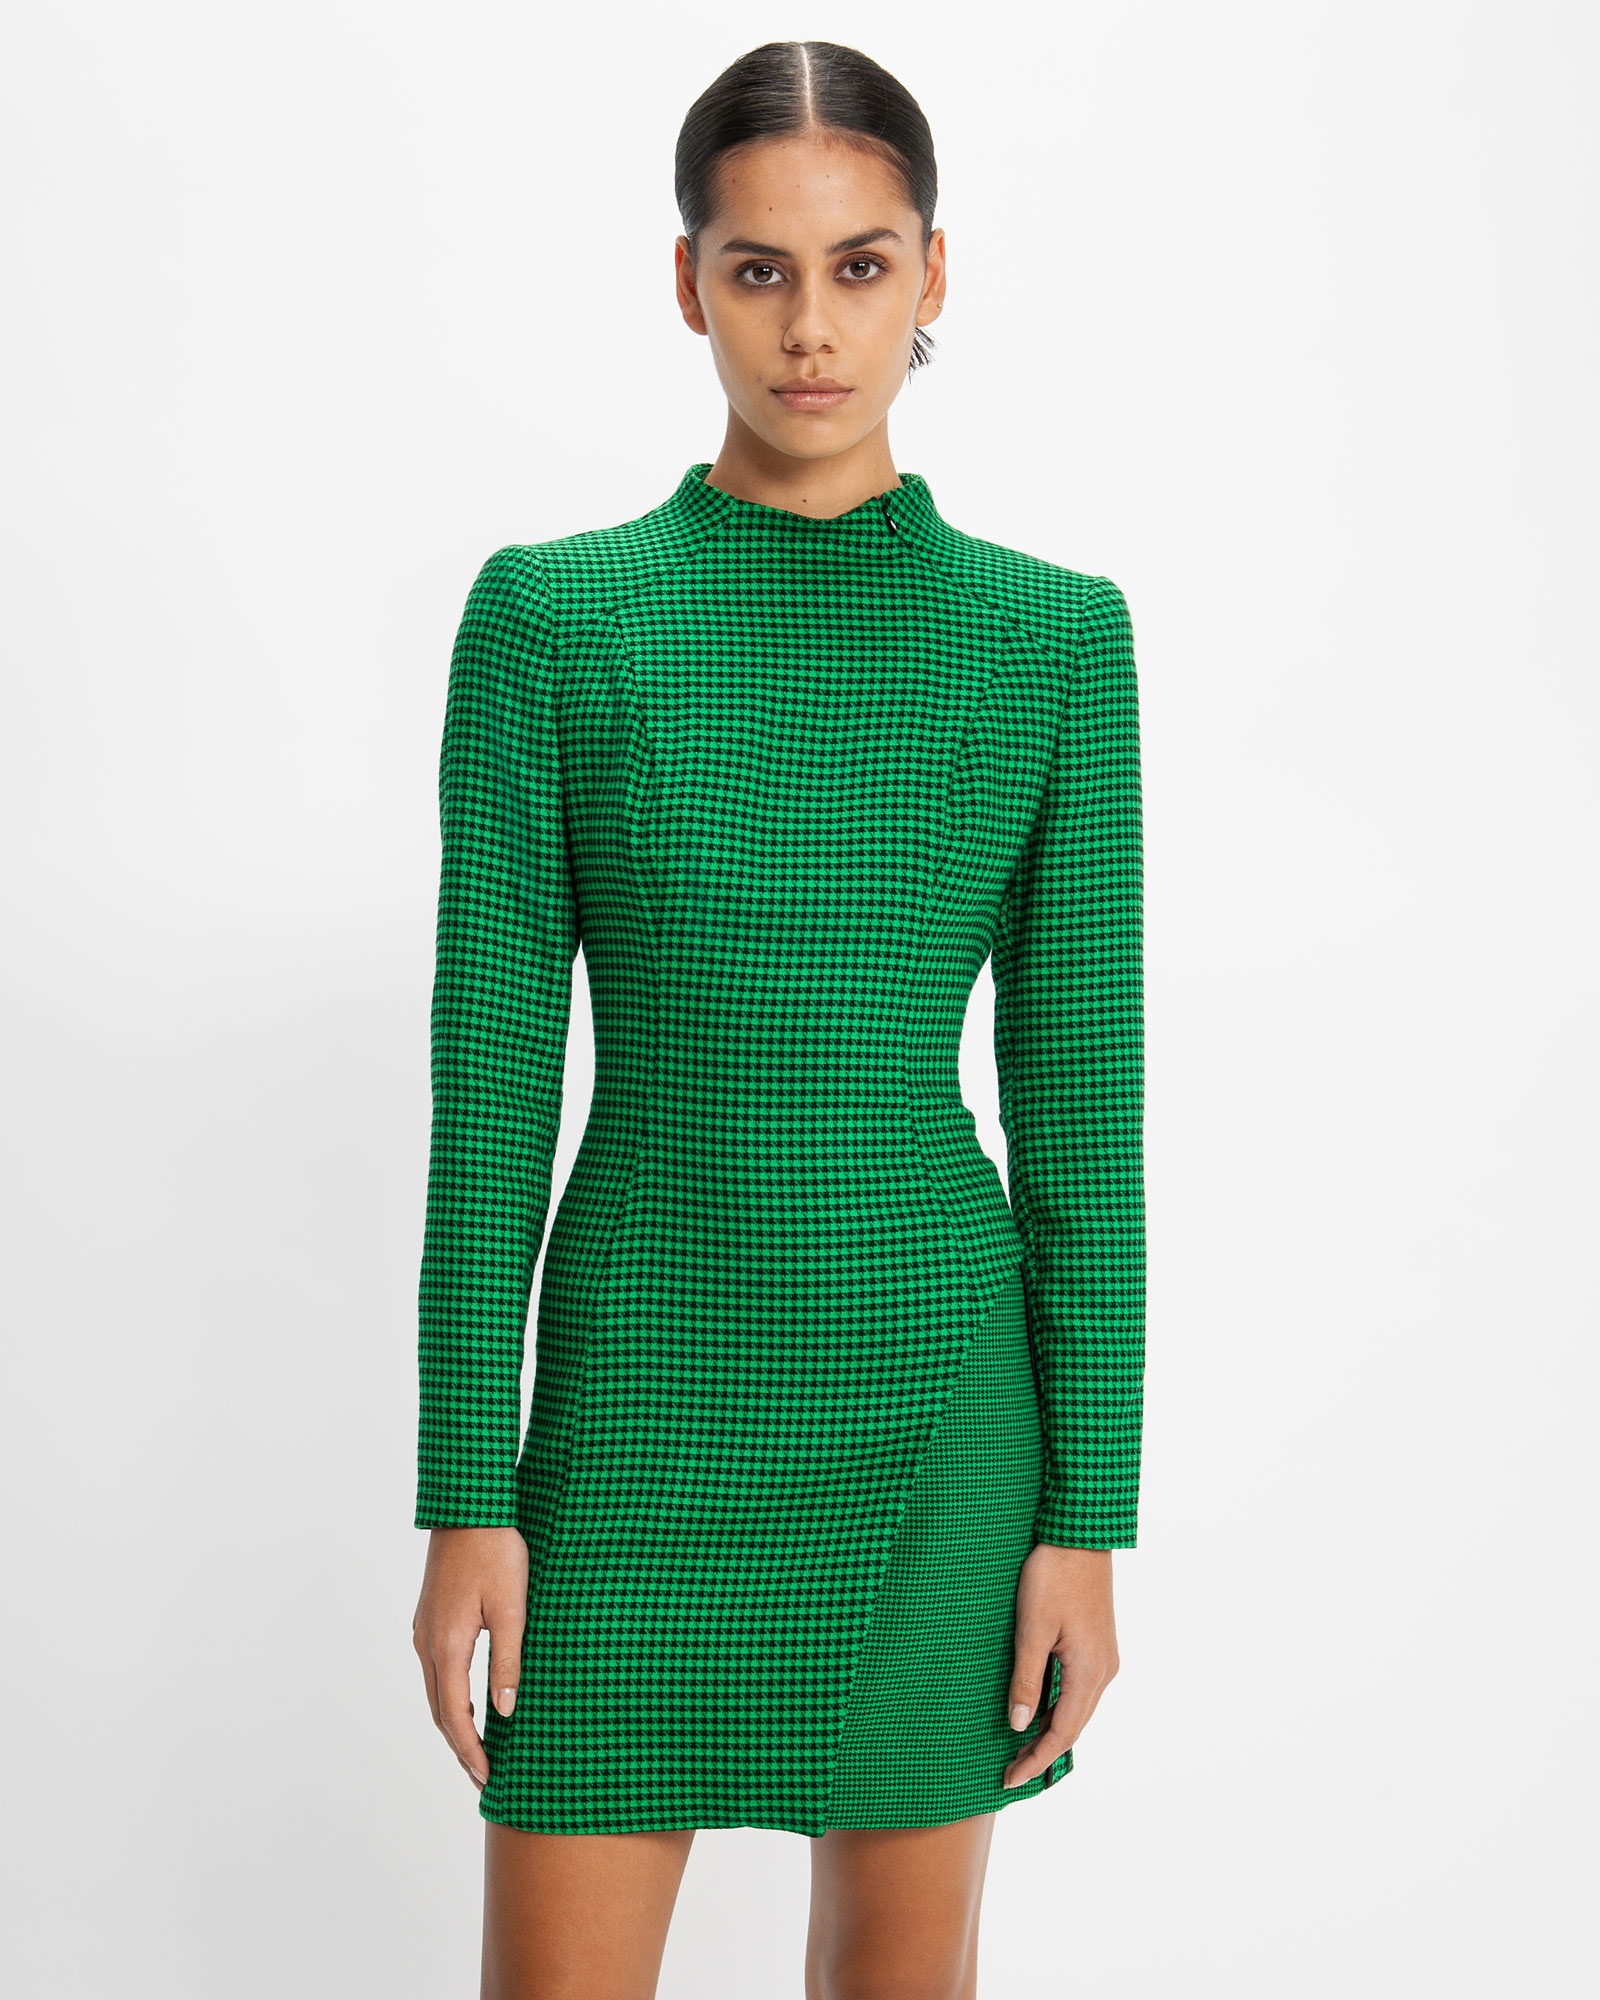 Houndstooth Layered Mini Dress | Buy Dresses Online - Cue